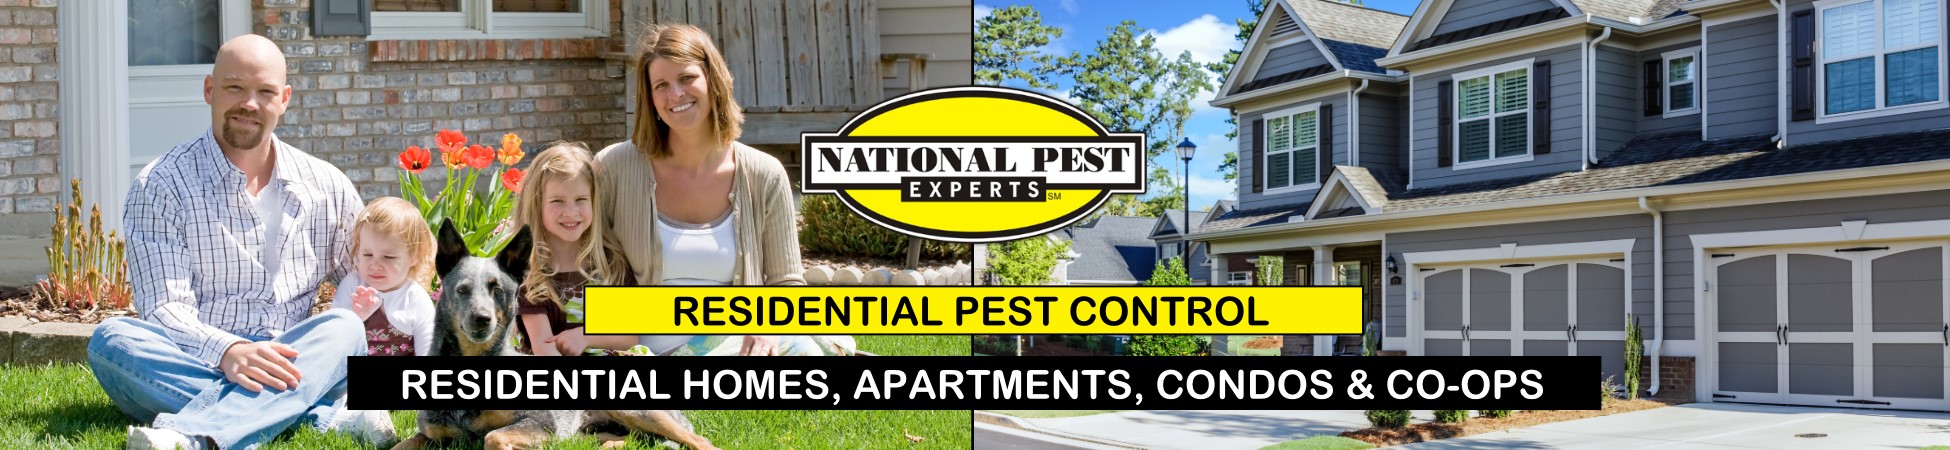 National Pest Experts - Residential exterminating and pest control in Kings Park, NY